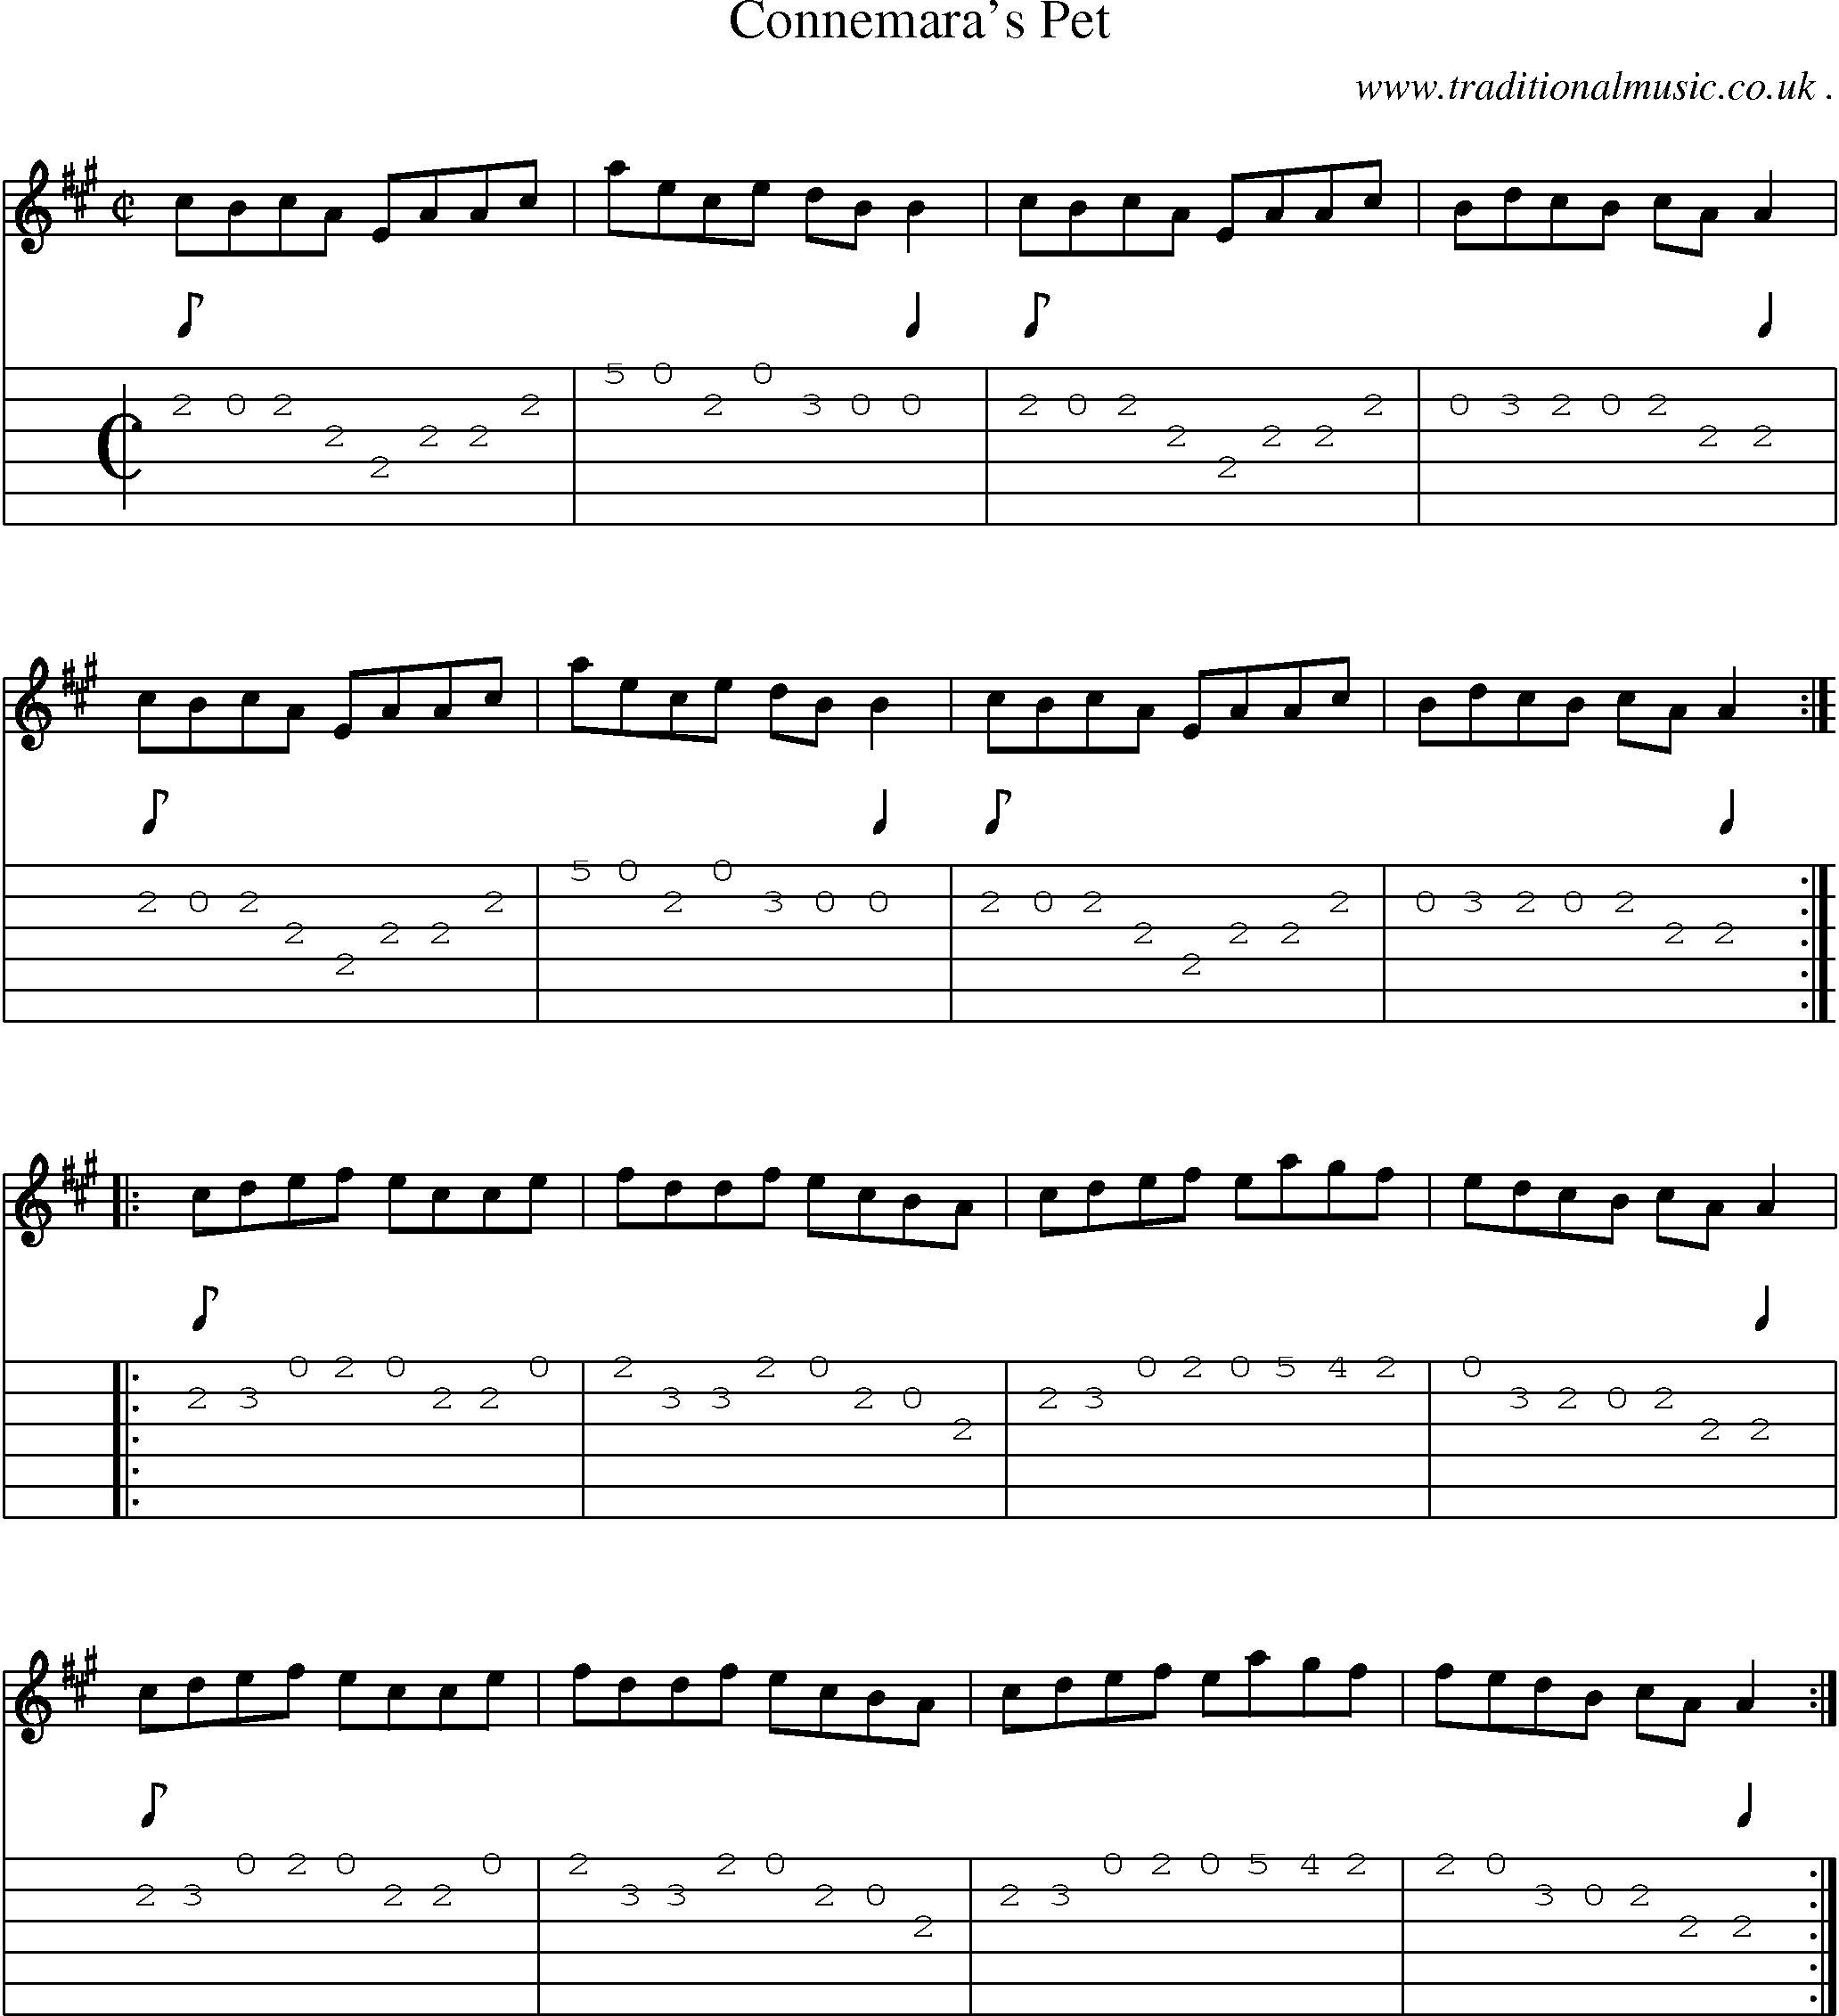 Sheet-Music and Guitar Tabs for Connemaras Pet